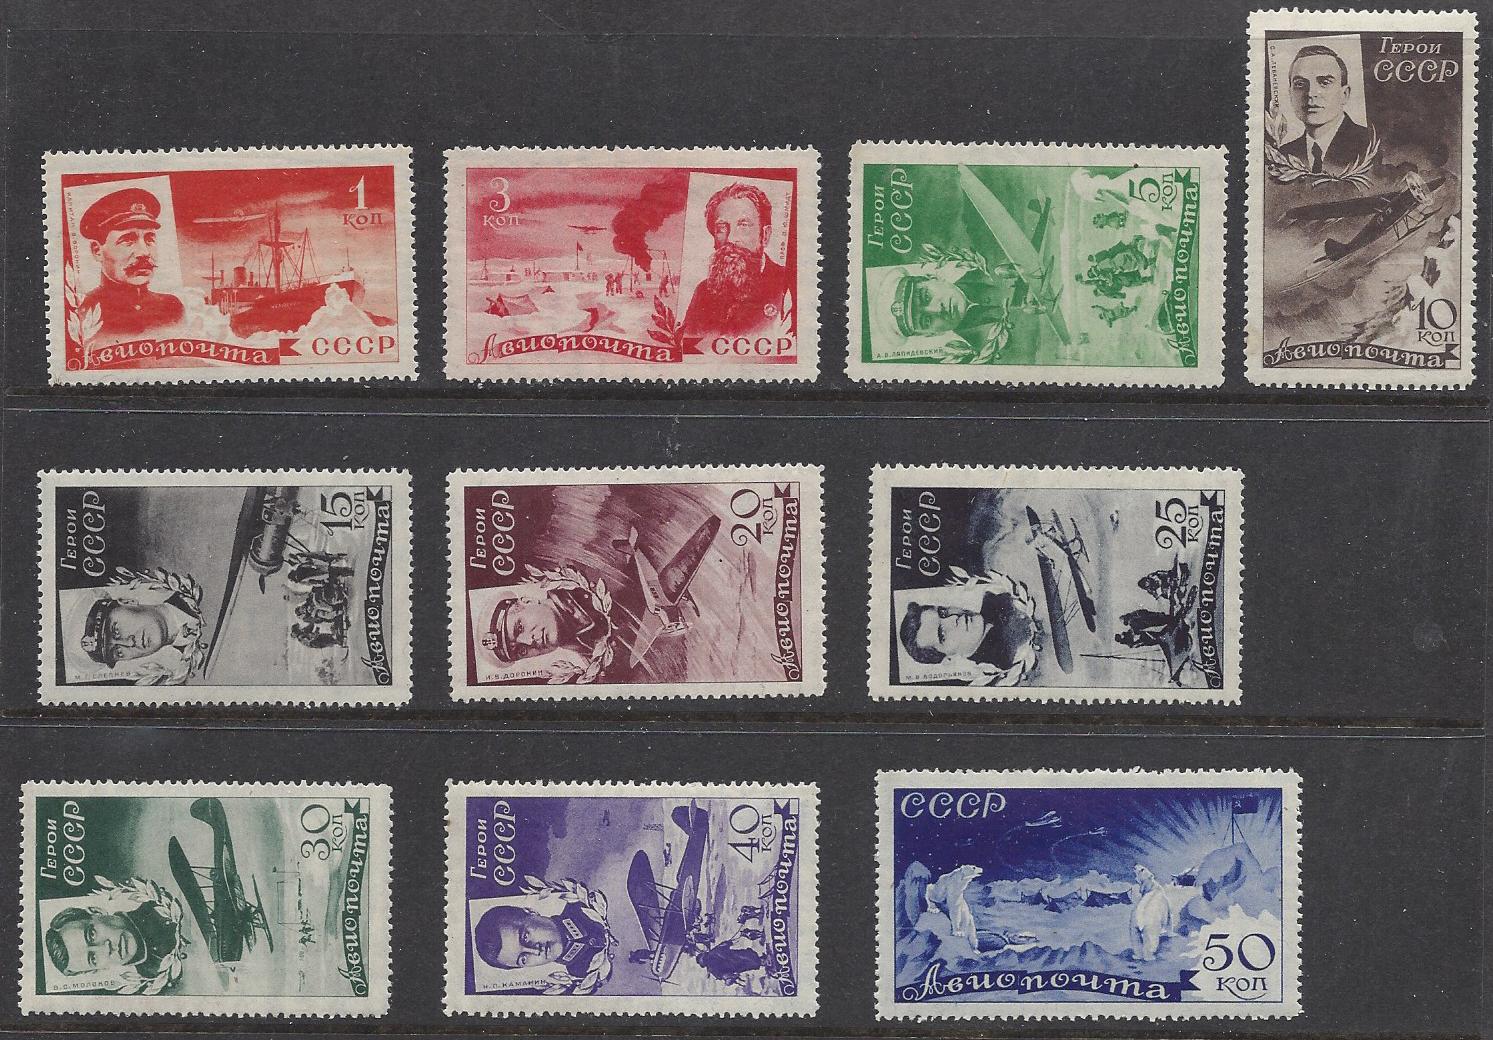 Russia Specialized - Airmail & Special Delivery Cheliuskin issue Scott C58-67 Michel 499-508Y 